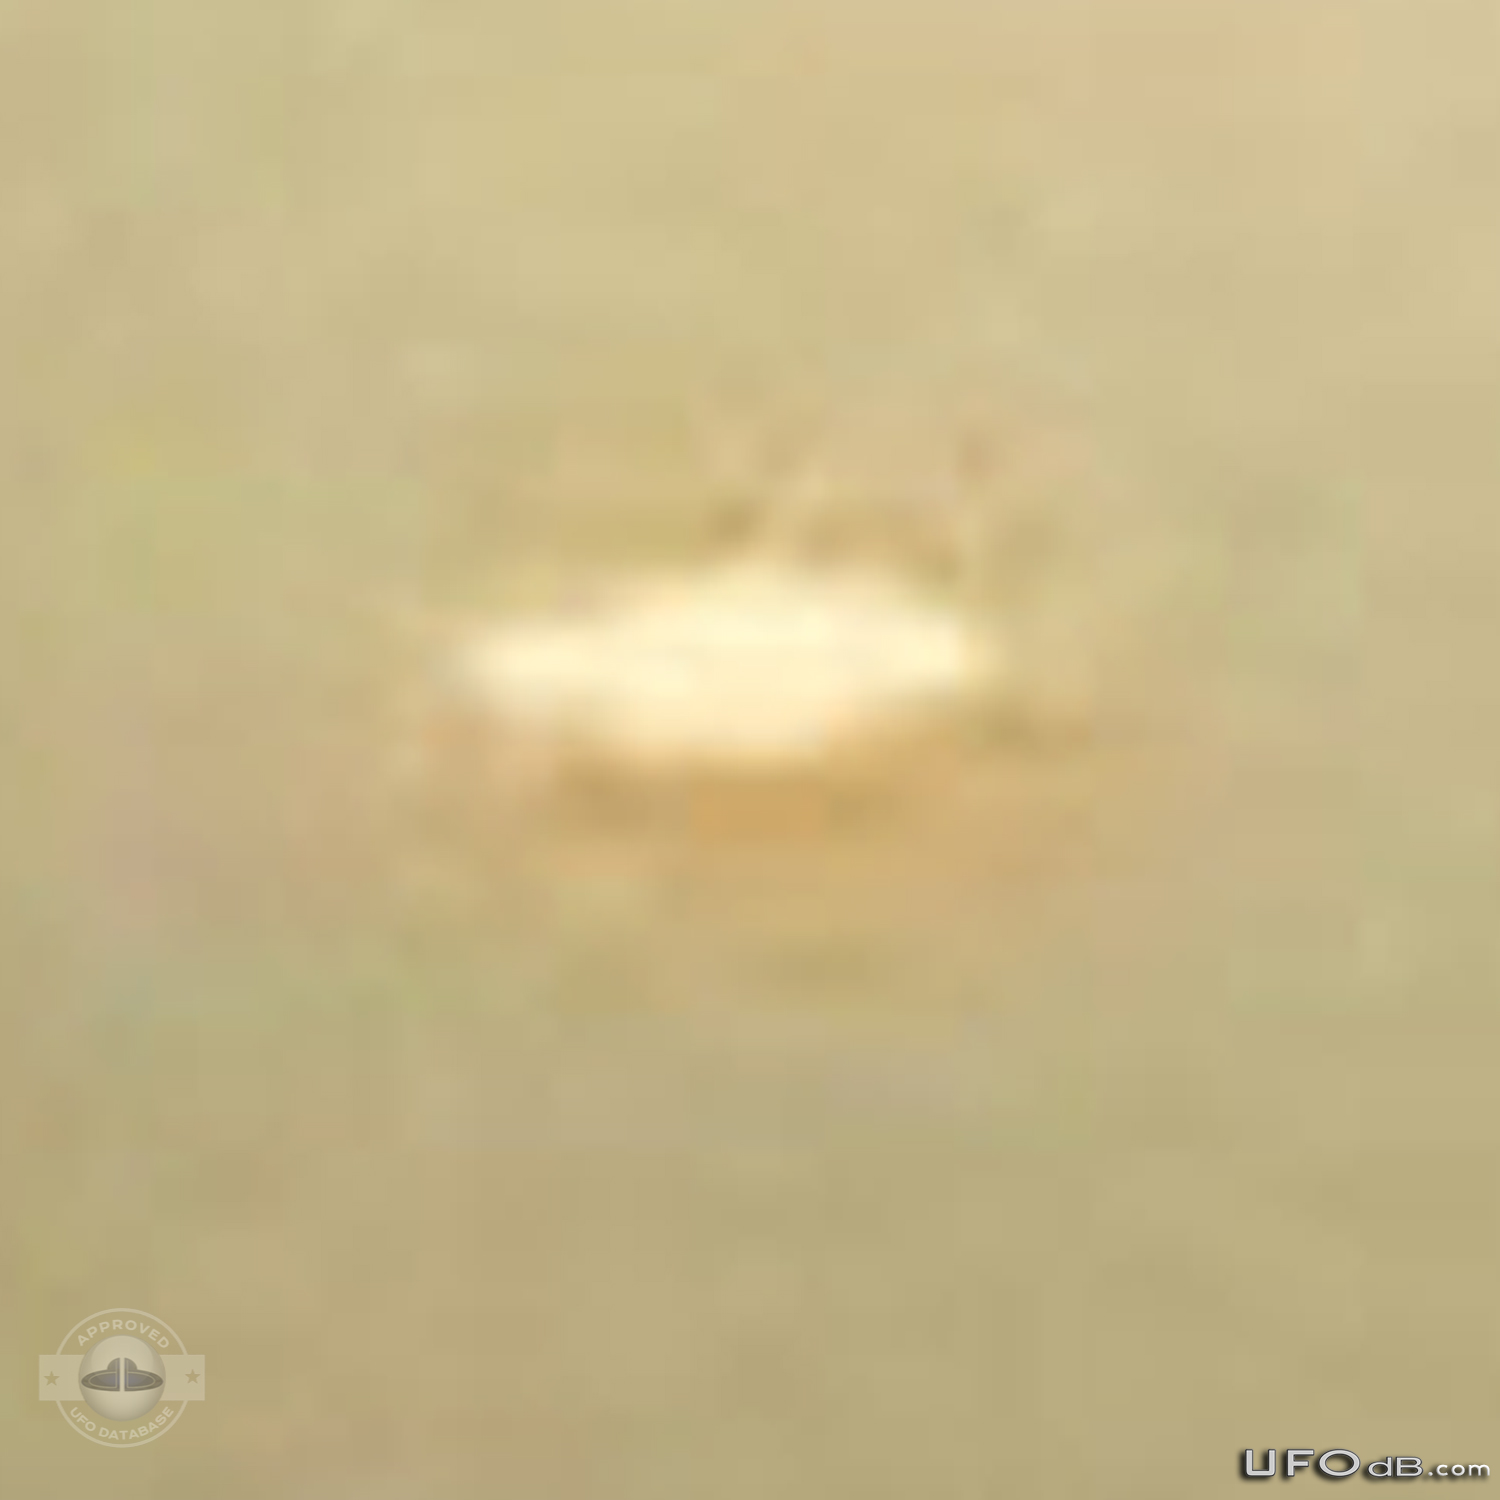 Sunrise reveals a fleet of cloaked UFOs in Chiba, Japan | January 2011 UFO Picture #244-5